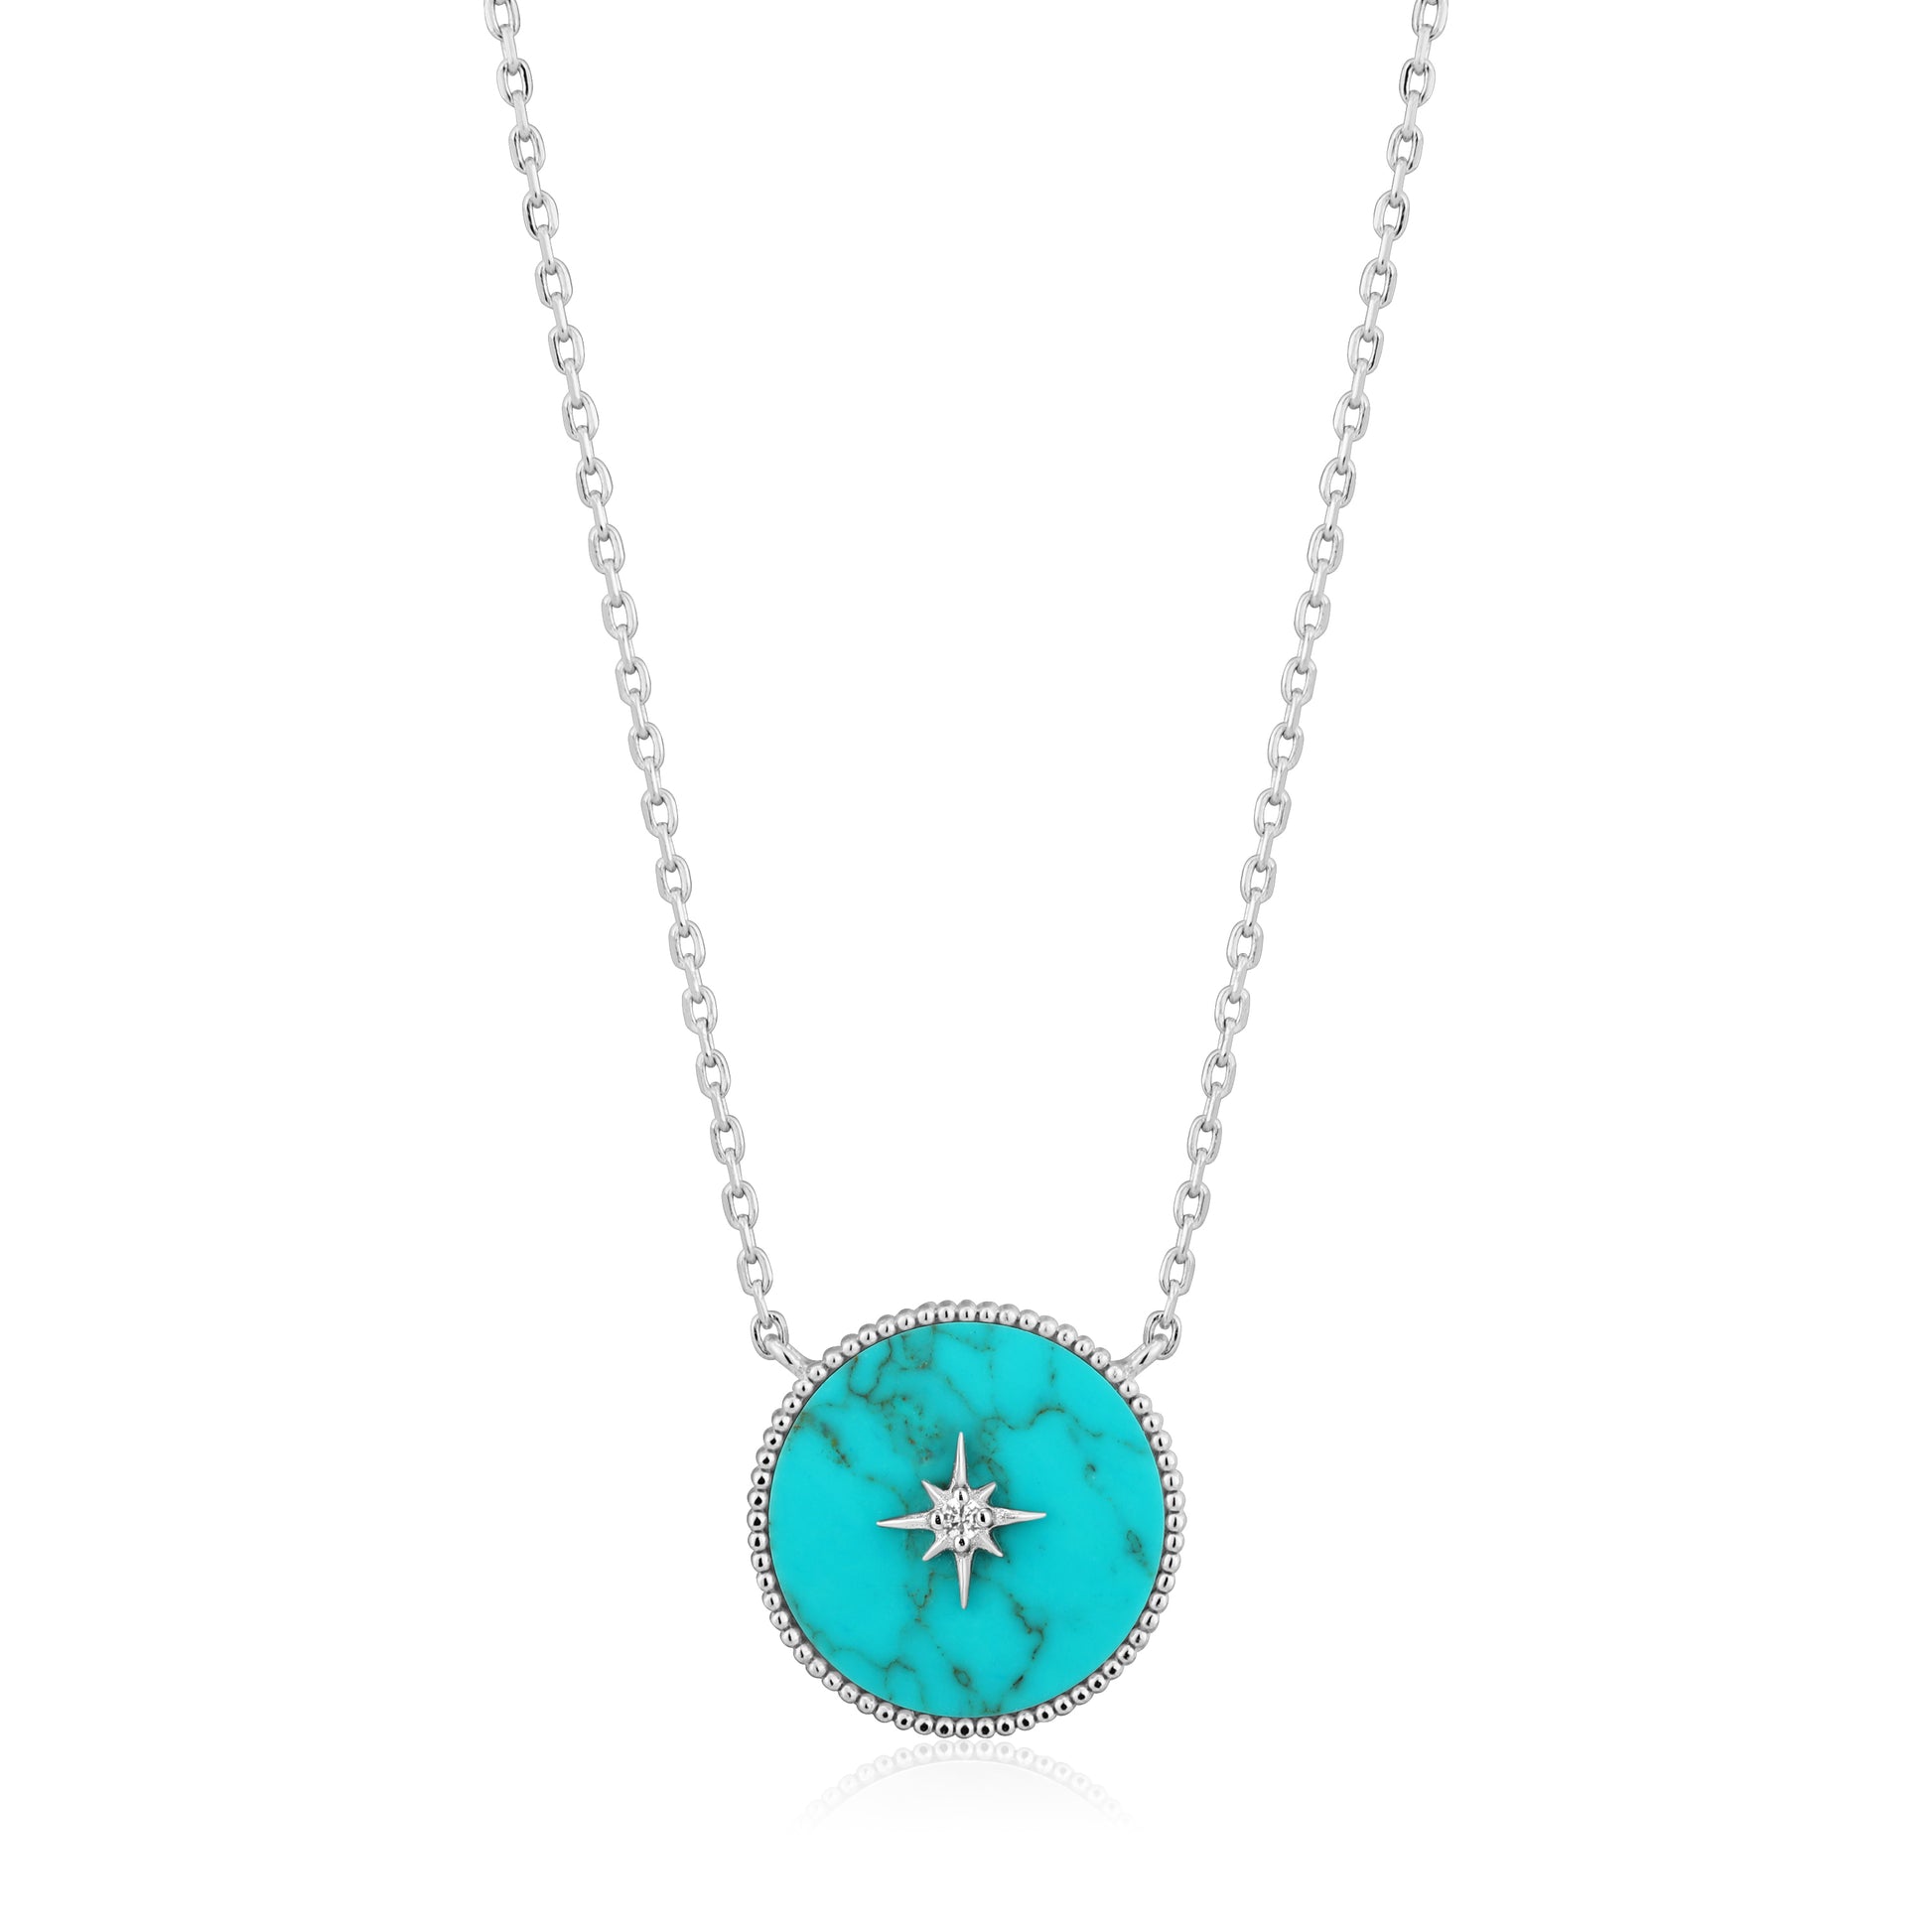 Ania Haie Turquoise Emblem Necklace - Silver Necklace